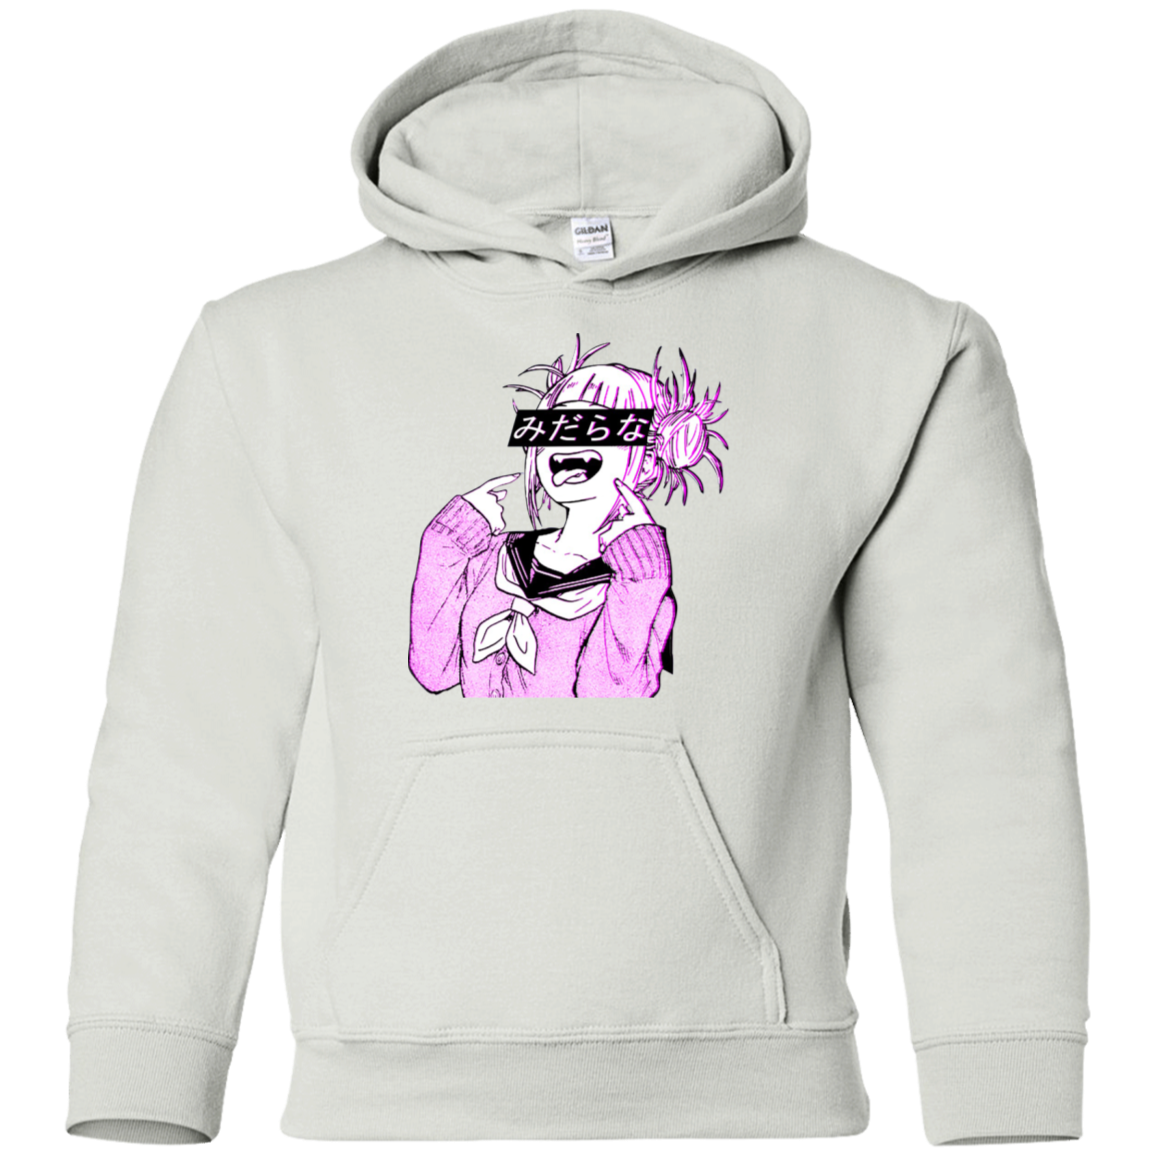 Download AGR LEWD (PINK) - Sad Japanese Anime Aesthetic Youth Pullover Hoodie - AGREEABLE